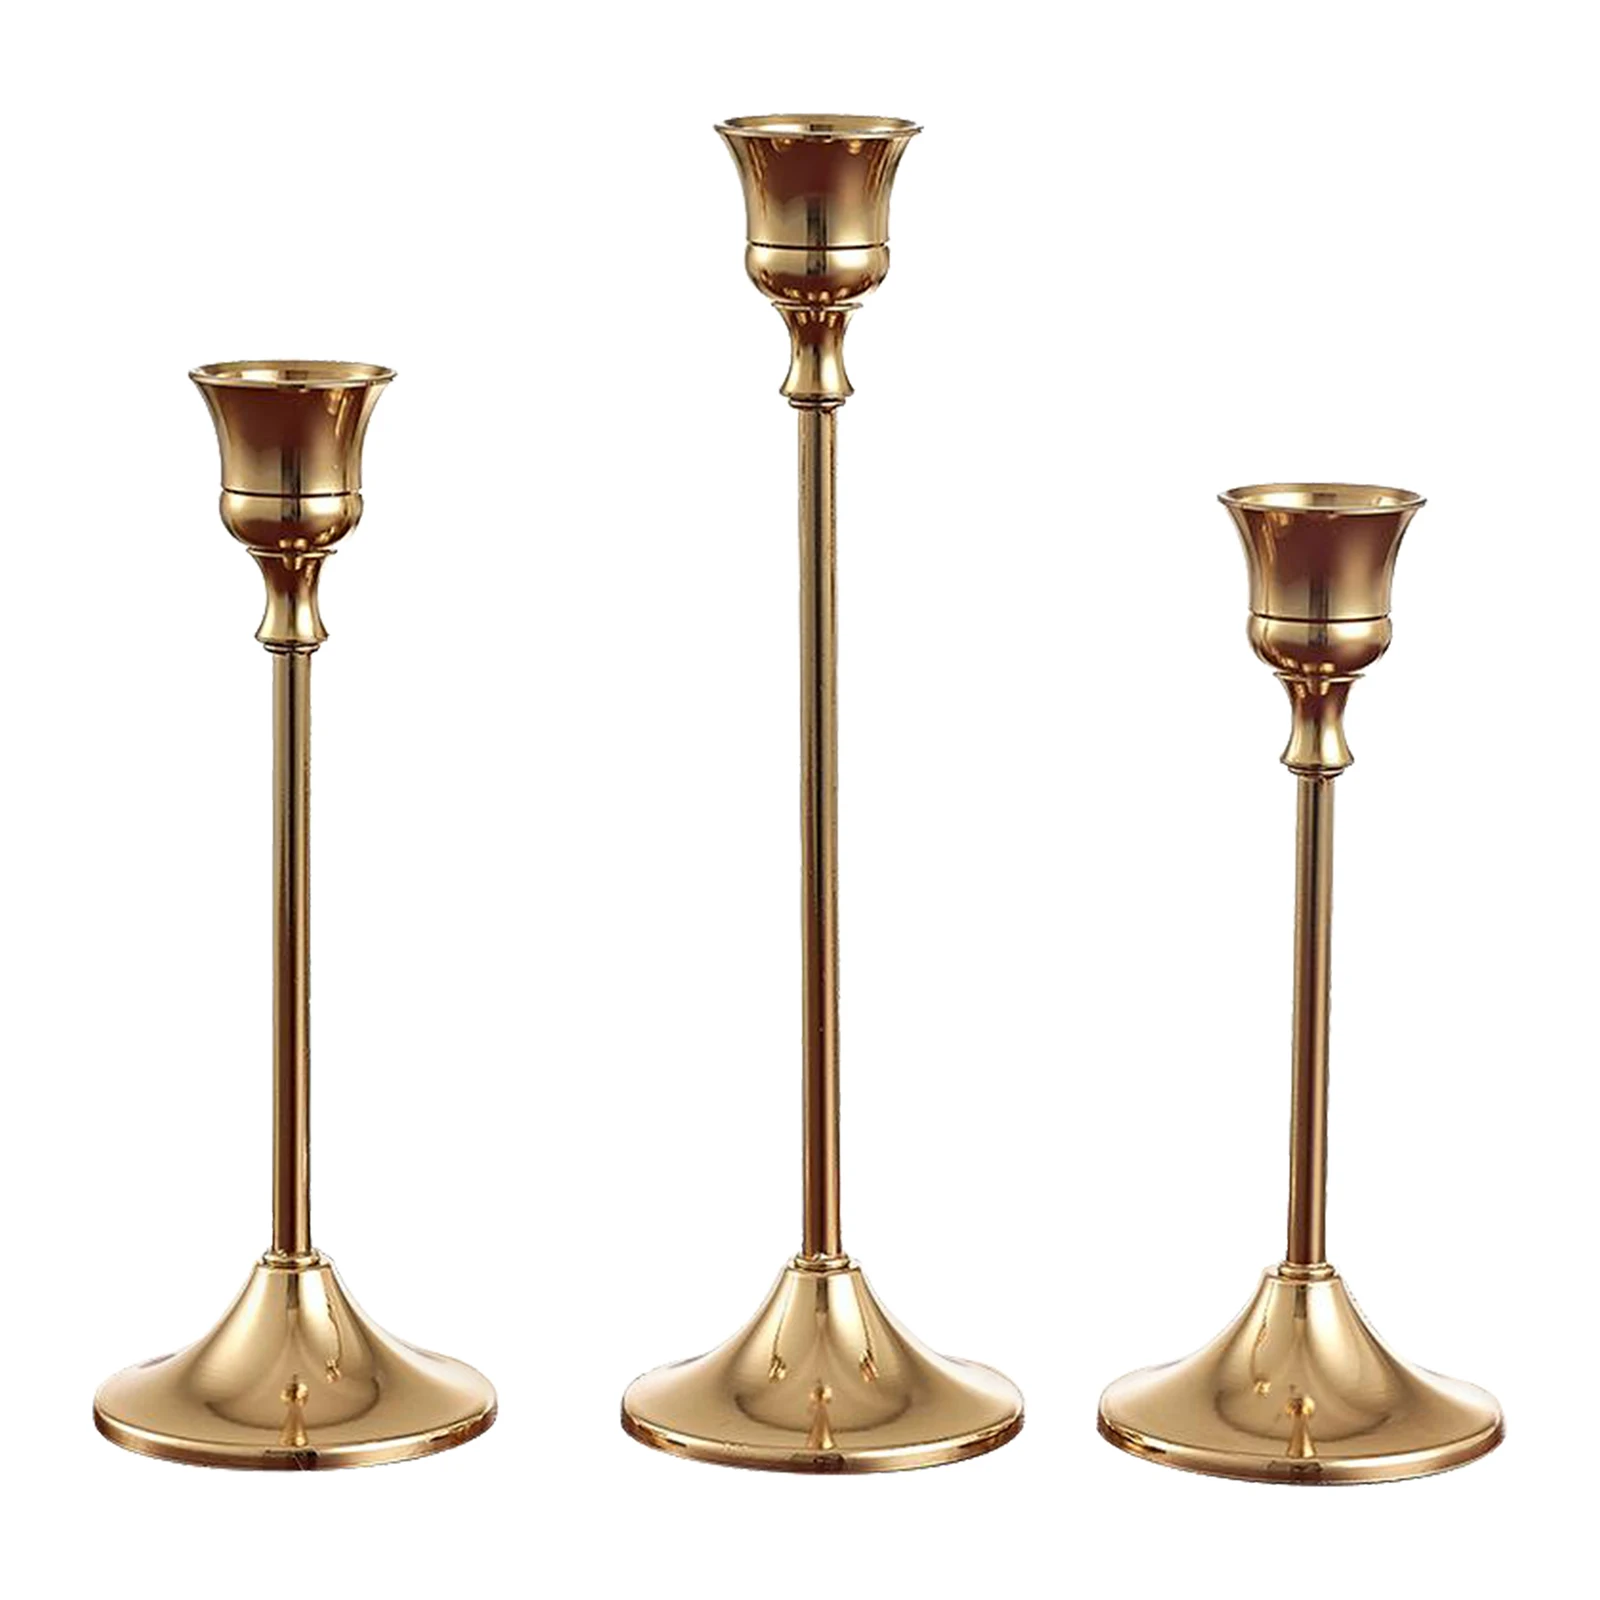 Metal Candle Holders Gold Candlestick Centerpieces Candelabra Centerpieces for Table Wedding Christmas Decoration